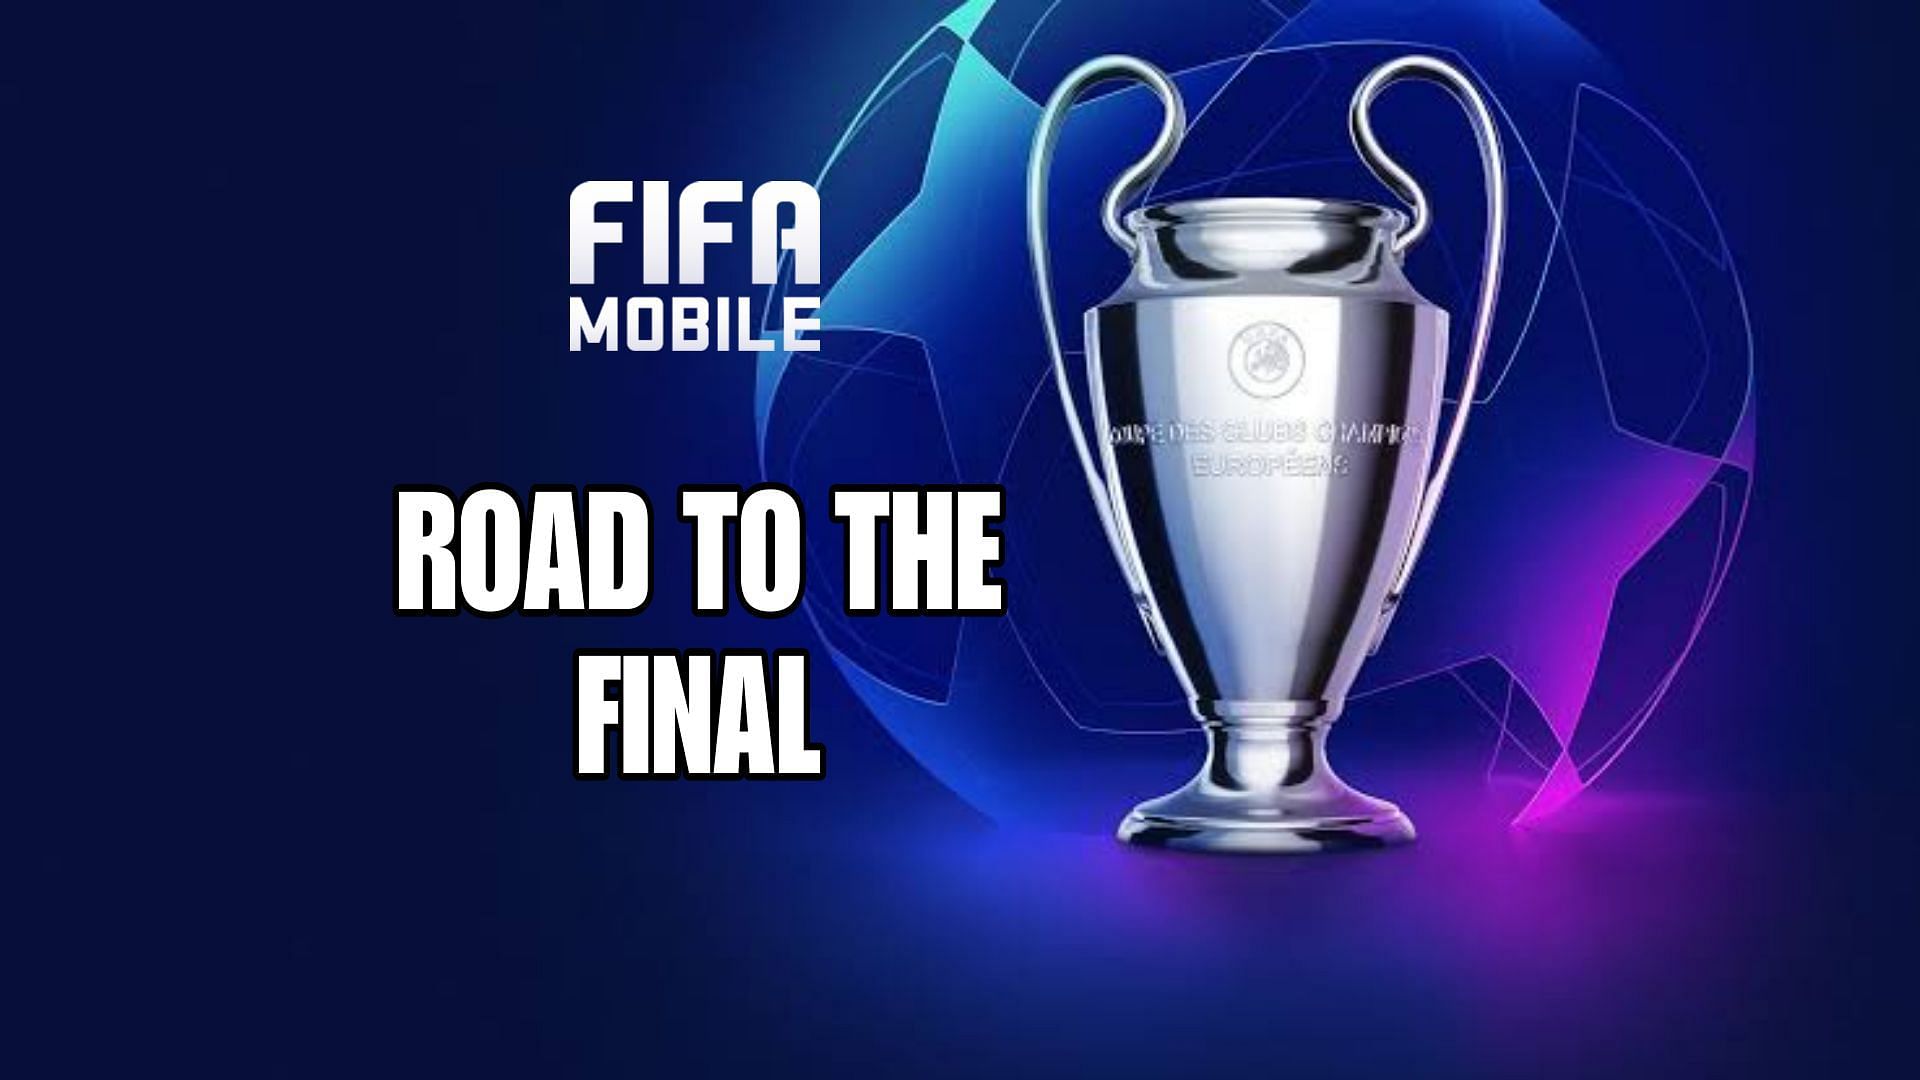 Road to the Final player cards are great items in FIFA Mobile (Image via Sportskeeda) 